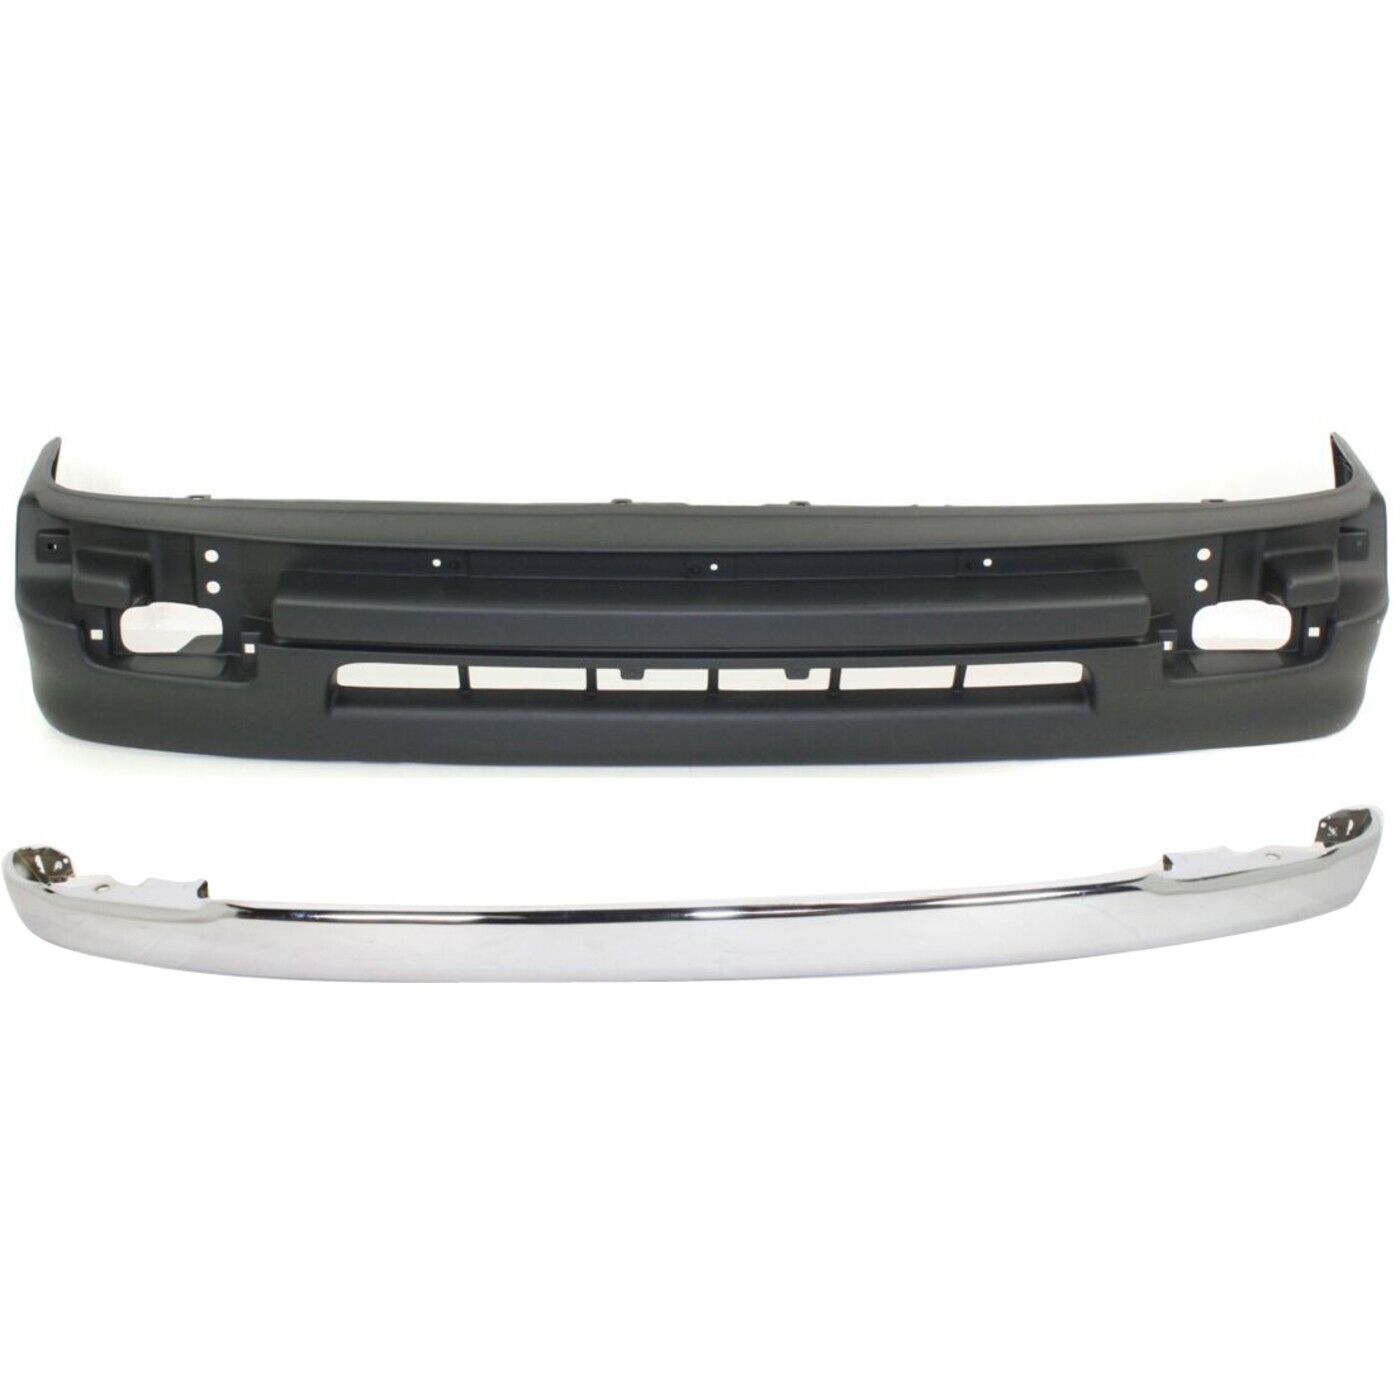 Bumper Cover Kit For 98-2000 Toyota Tacoma DLX Model Front 2pc